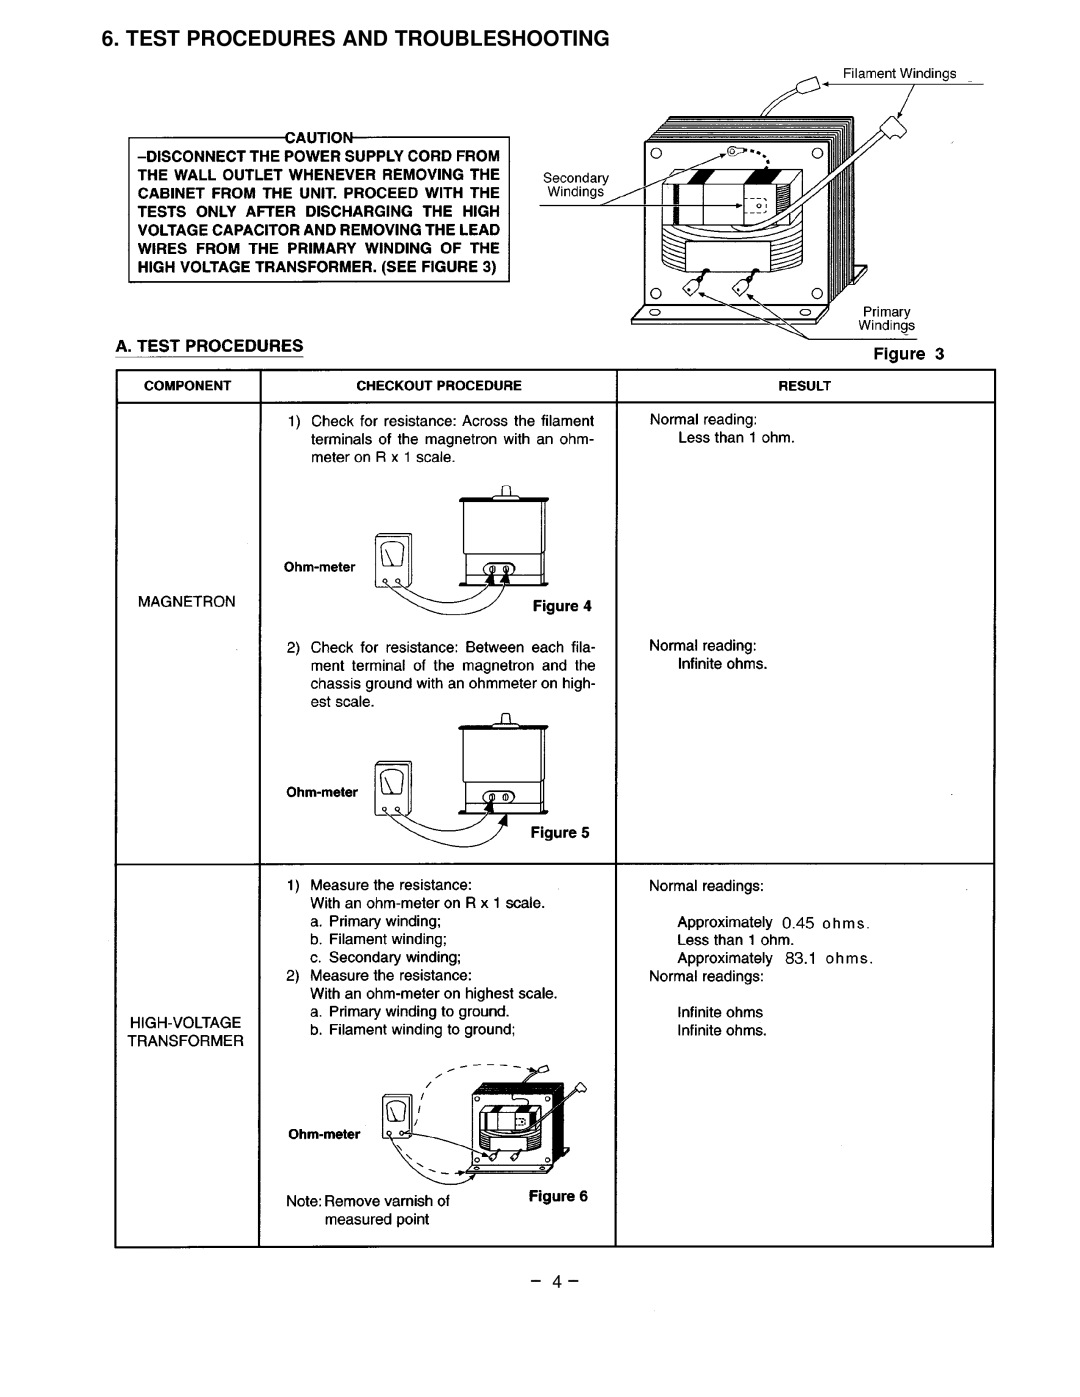 Garland EM-S85 service manual Test Procedures And Troubleshooting 